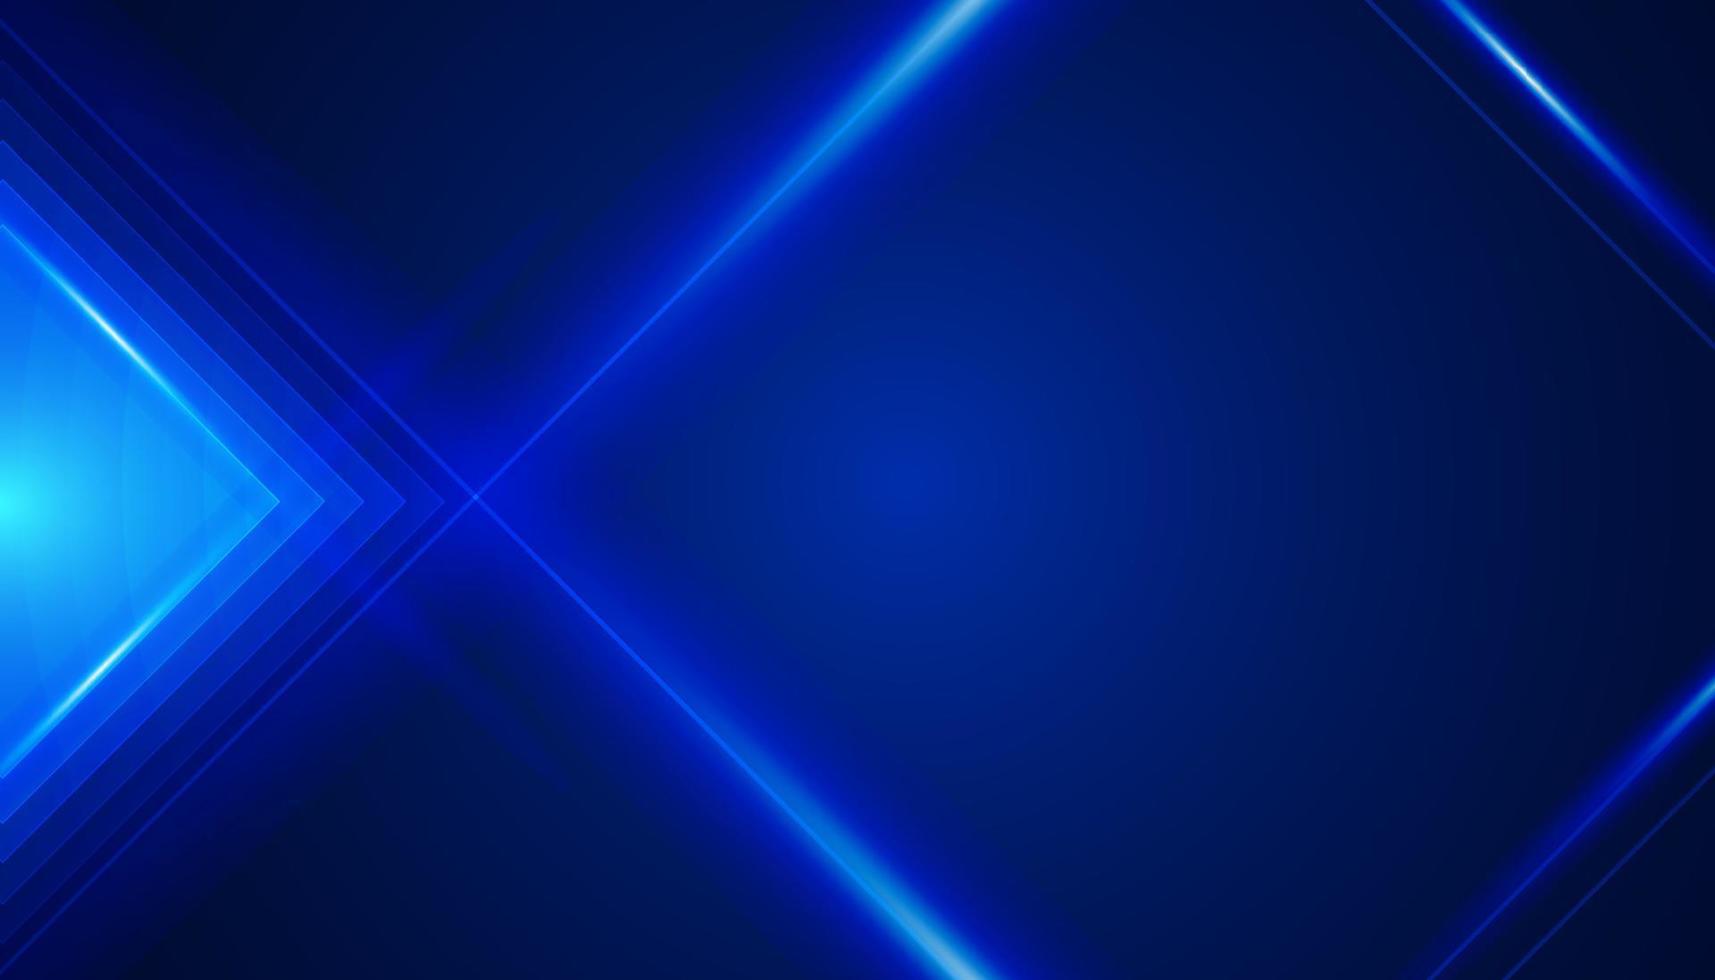 Modern abstract technology backgrounds triangel wave lines background with blue light effect concept. Digital data, communication, science and futuristic concept. vector illustration